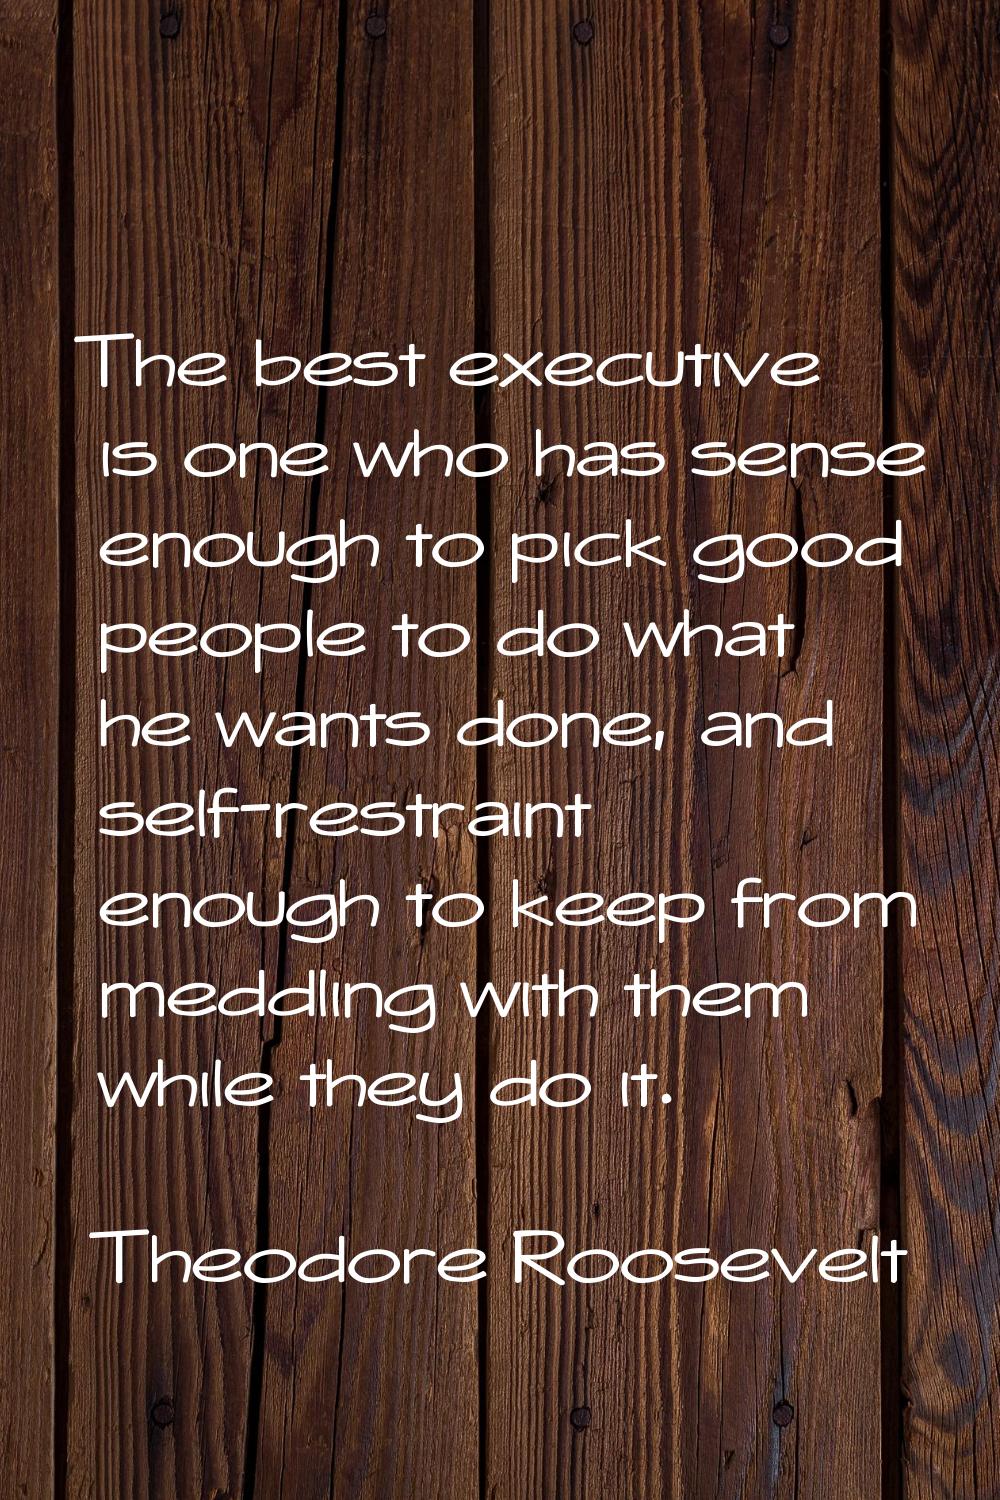 The best executive is one who has sense enough to pick good people to do what he wants done, and se